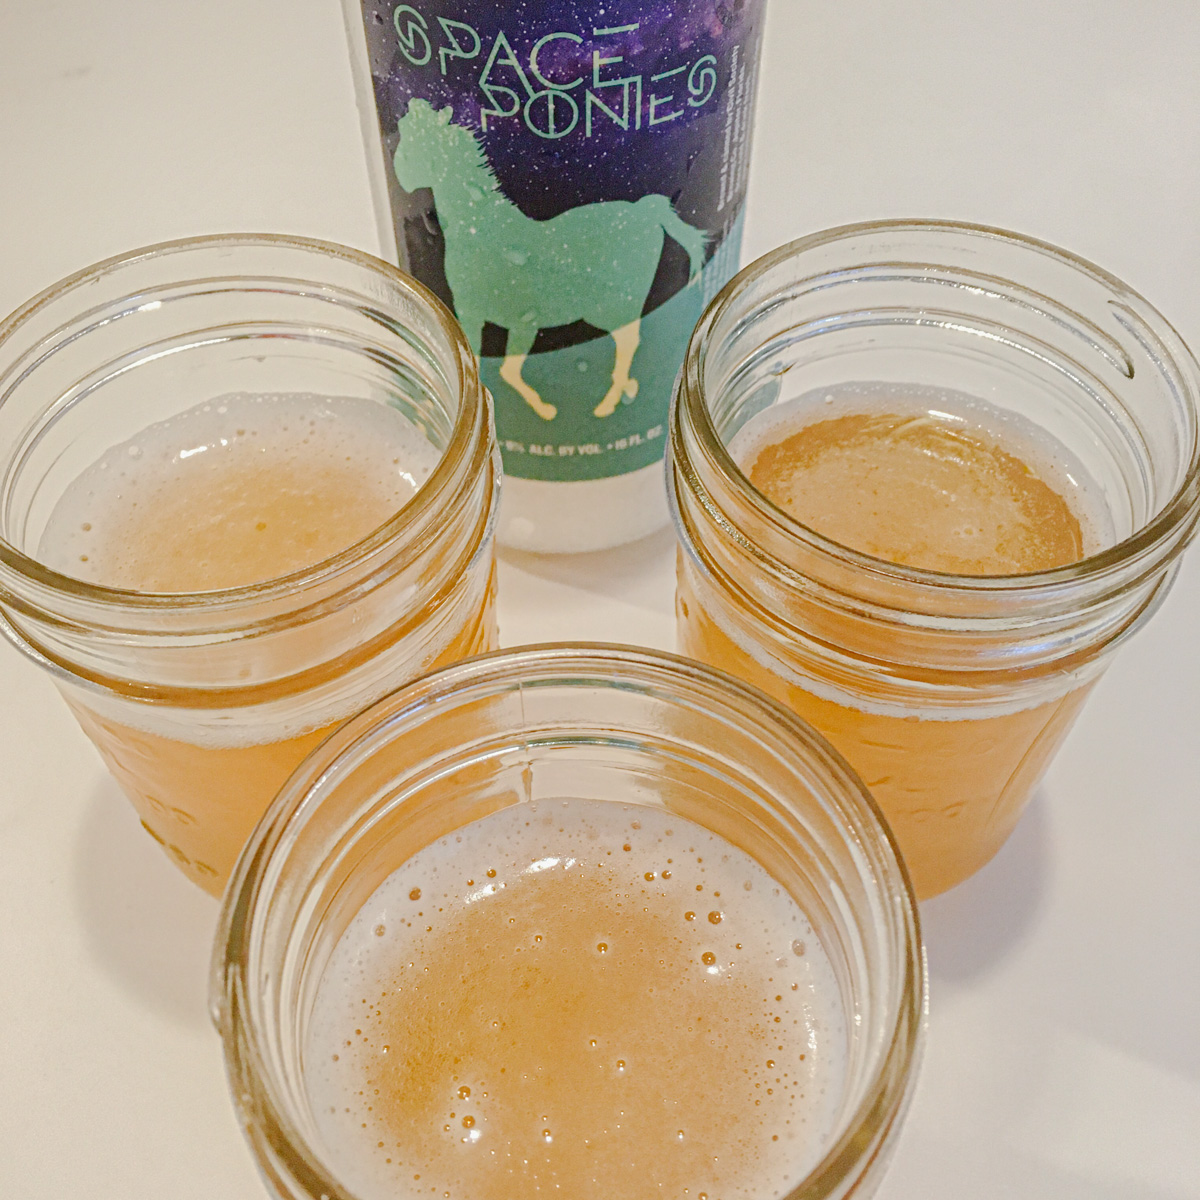 Space Ponies - Civil Society Brewing | ViewFromALove